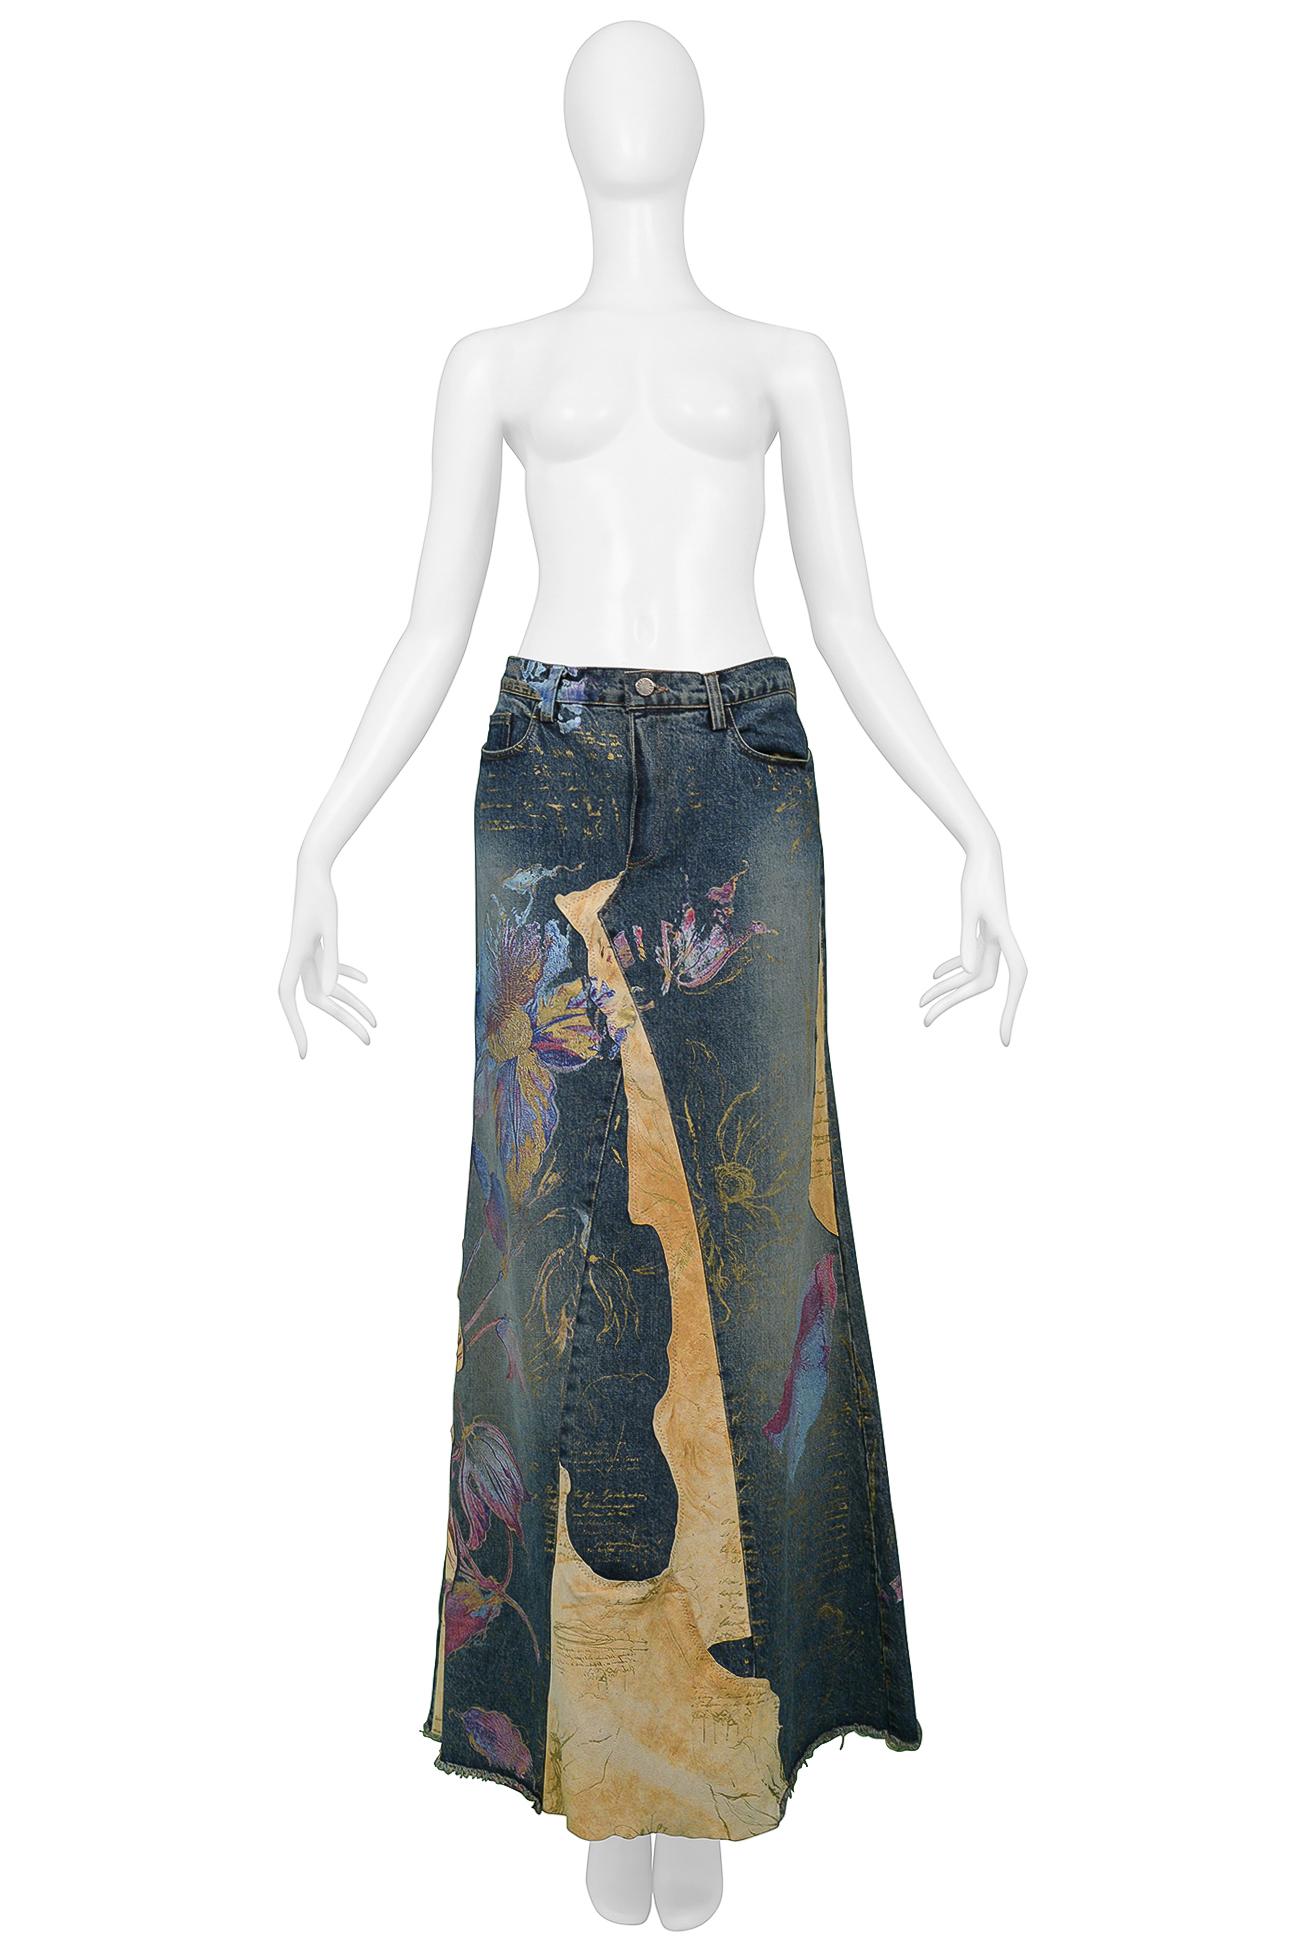 Resurrection is pleased to offer a vintage Roberto Cavalli blue denim patchwork skirt featuring natural leather raw edge patches, hand-painted floral print, a sexy center back slit, and maxi length. 

Roberto Cavalli
Size Medium
Fabric Cotton Denim